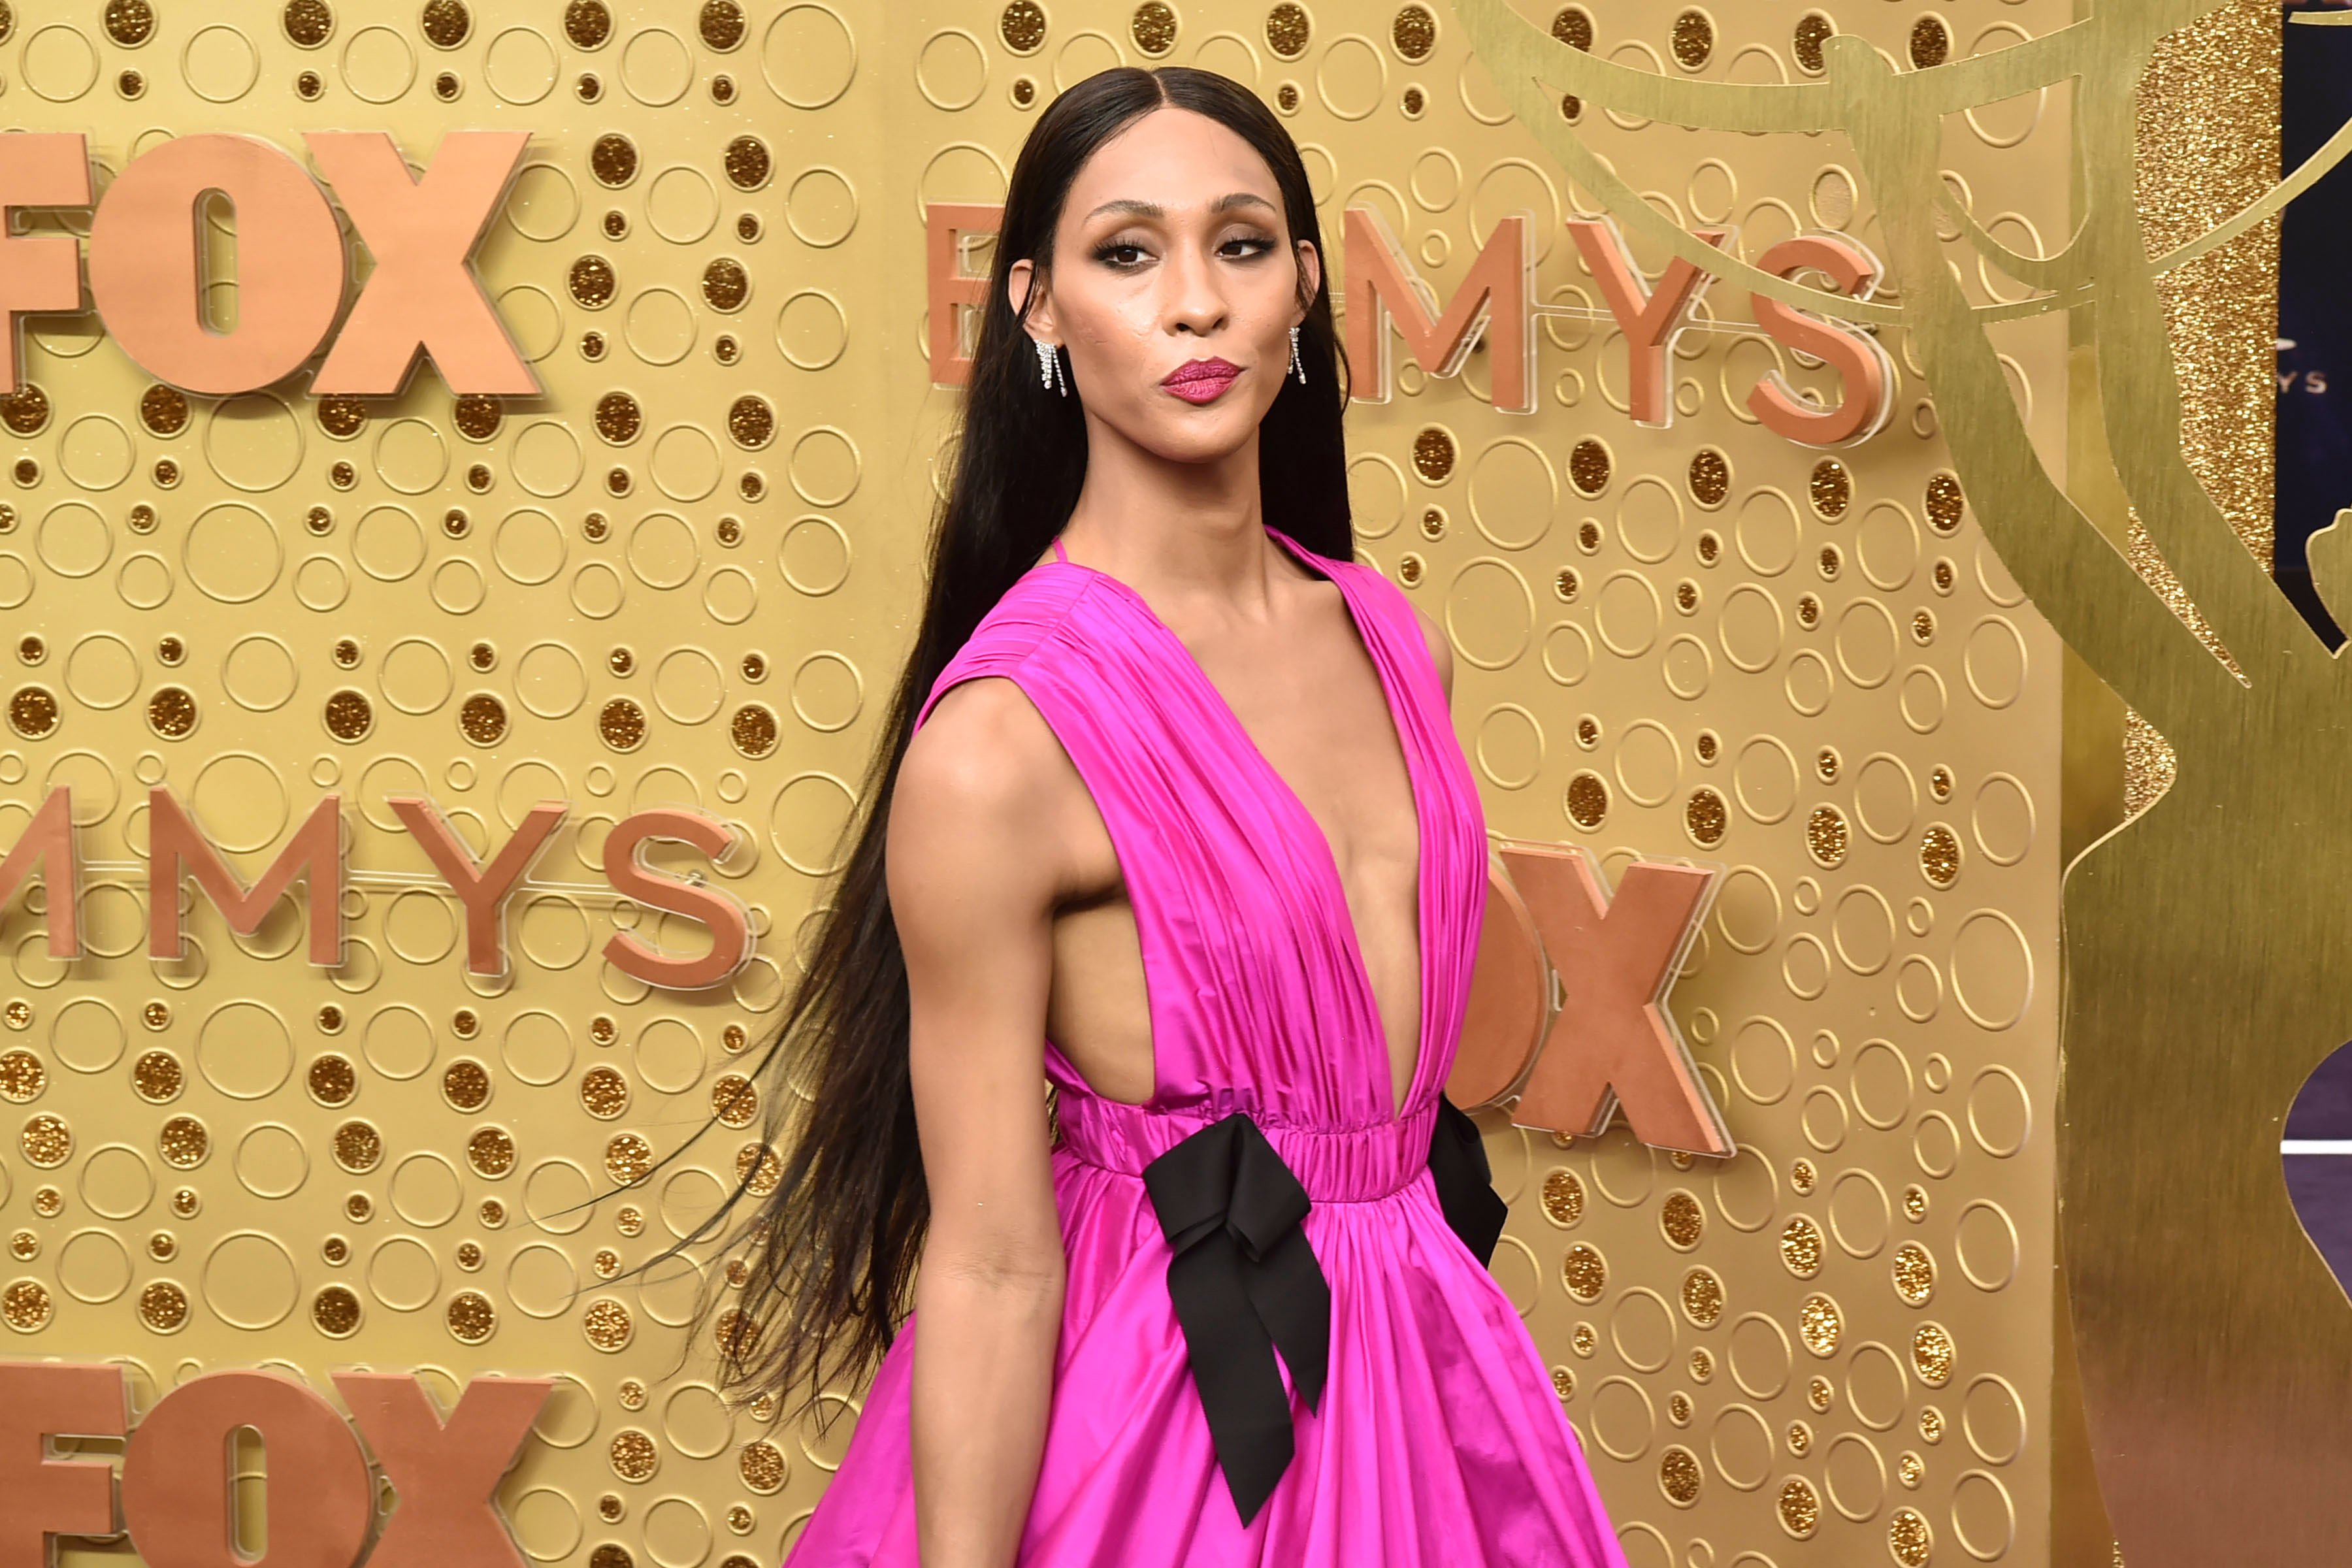 'Pose' star MJ Rodriguez at the 71st Emmys wearing a pink gown on the red carpet.